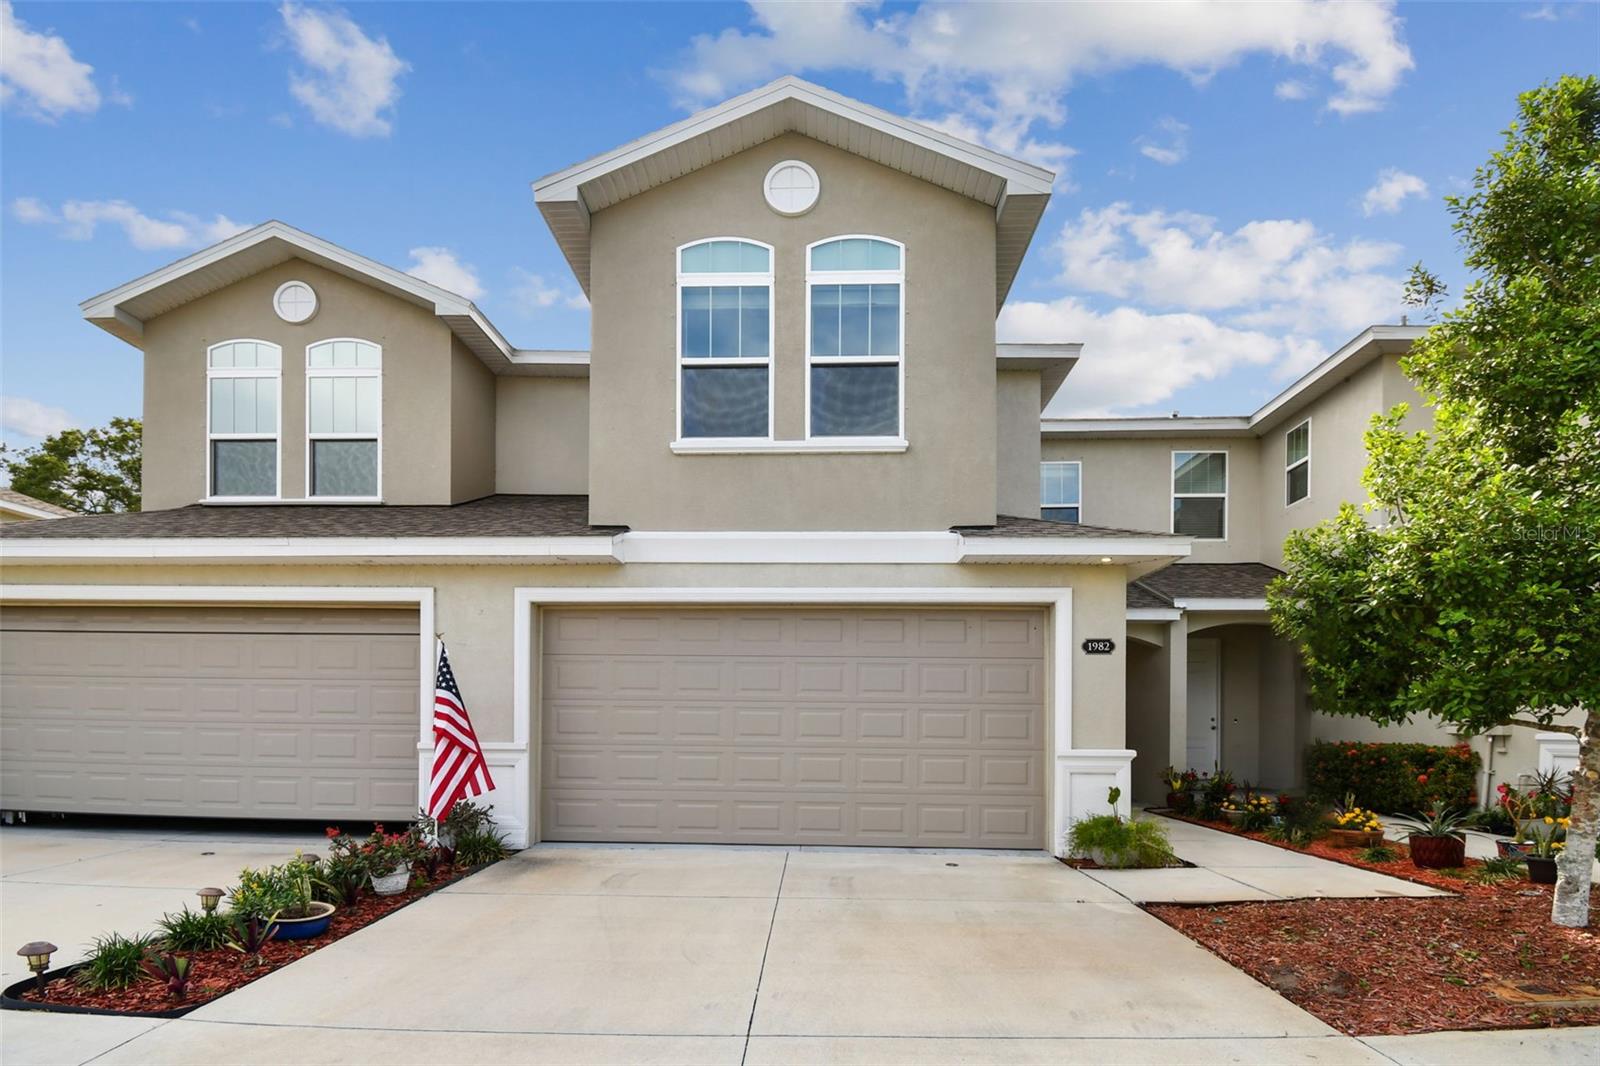 View CLEARWATER, FL 33763 townhome